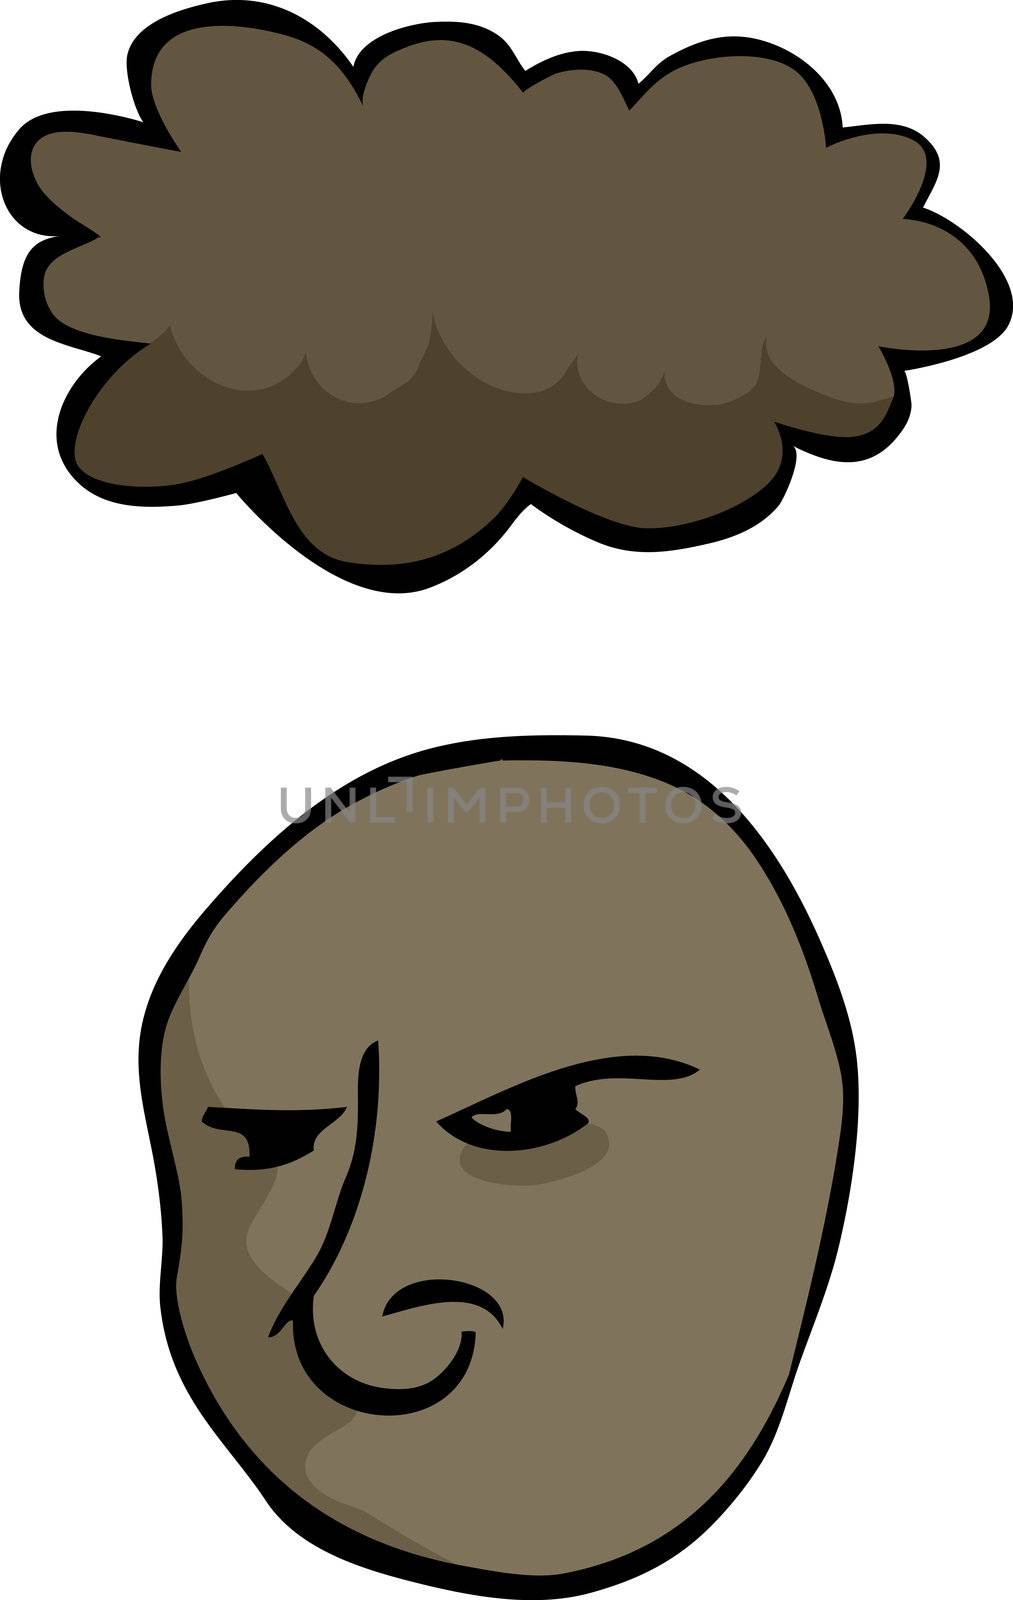 Angry face with cloud hanging above it